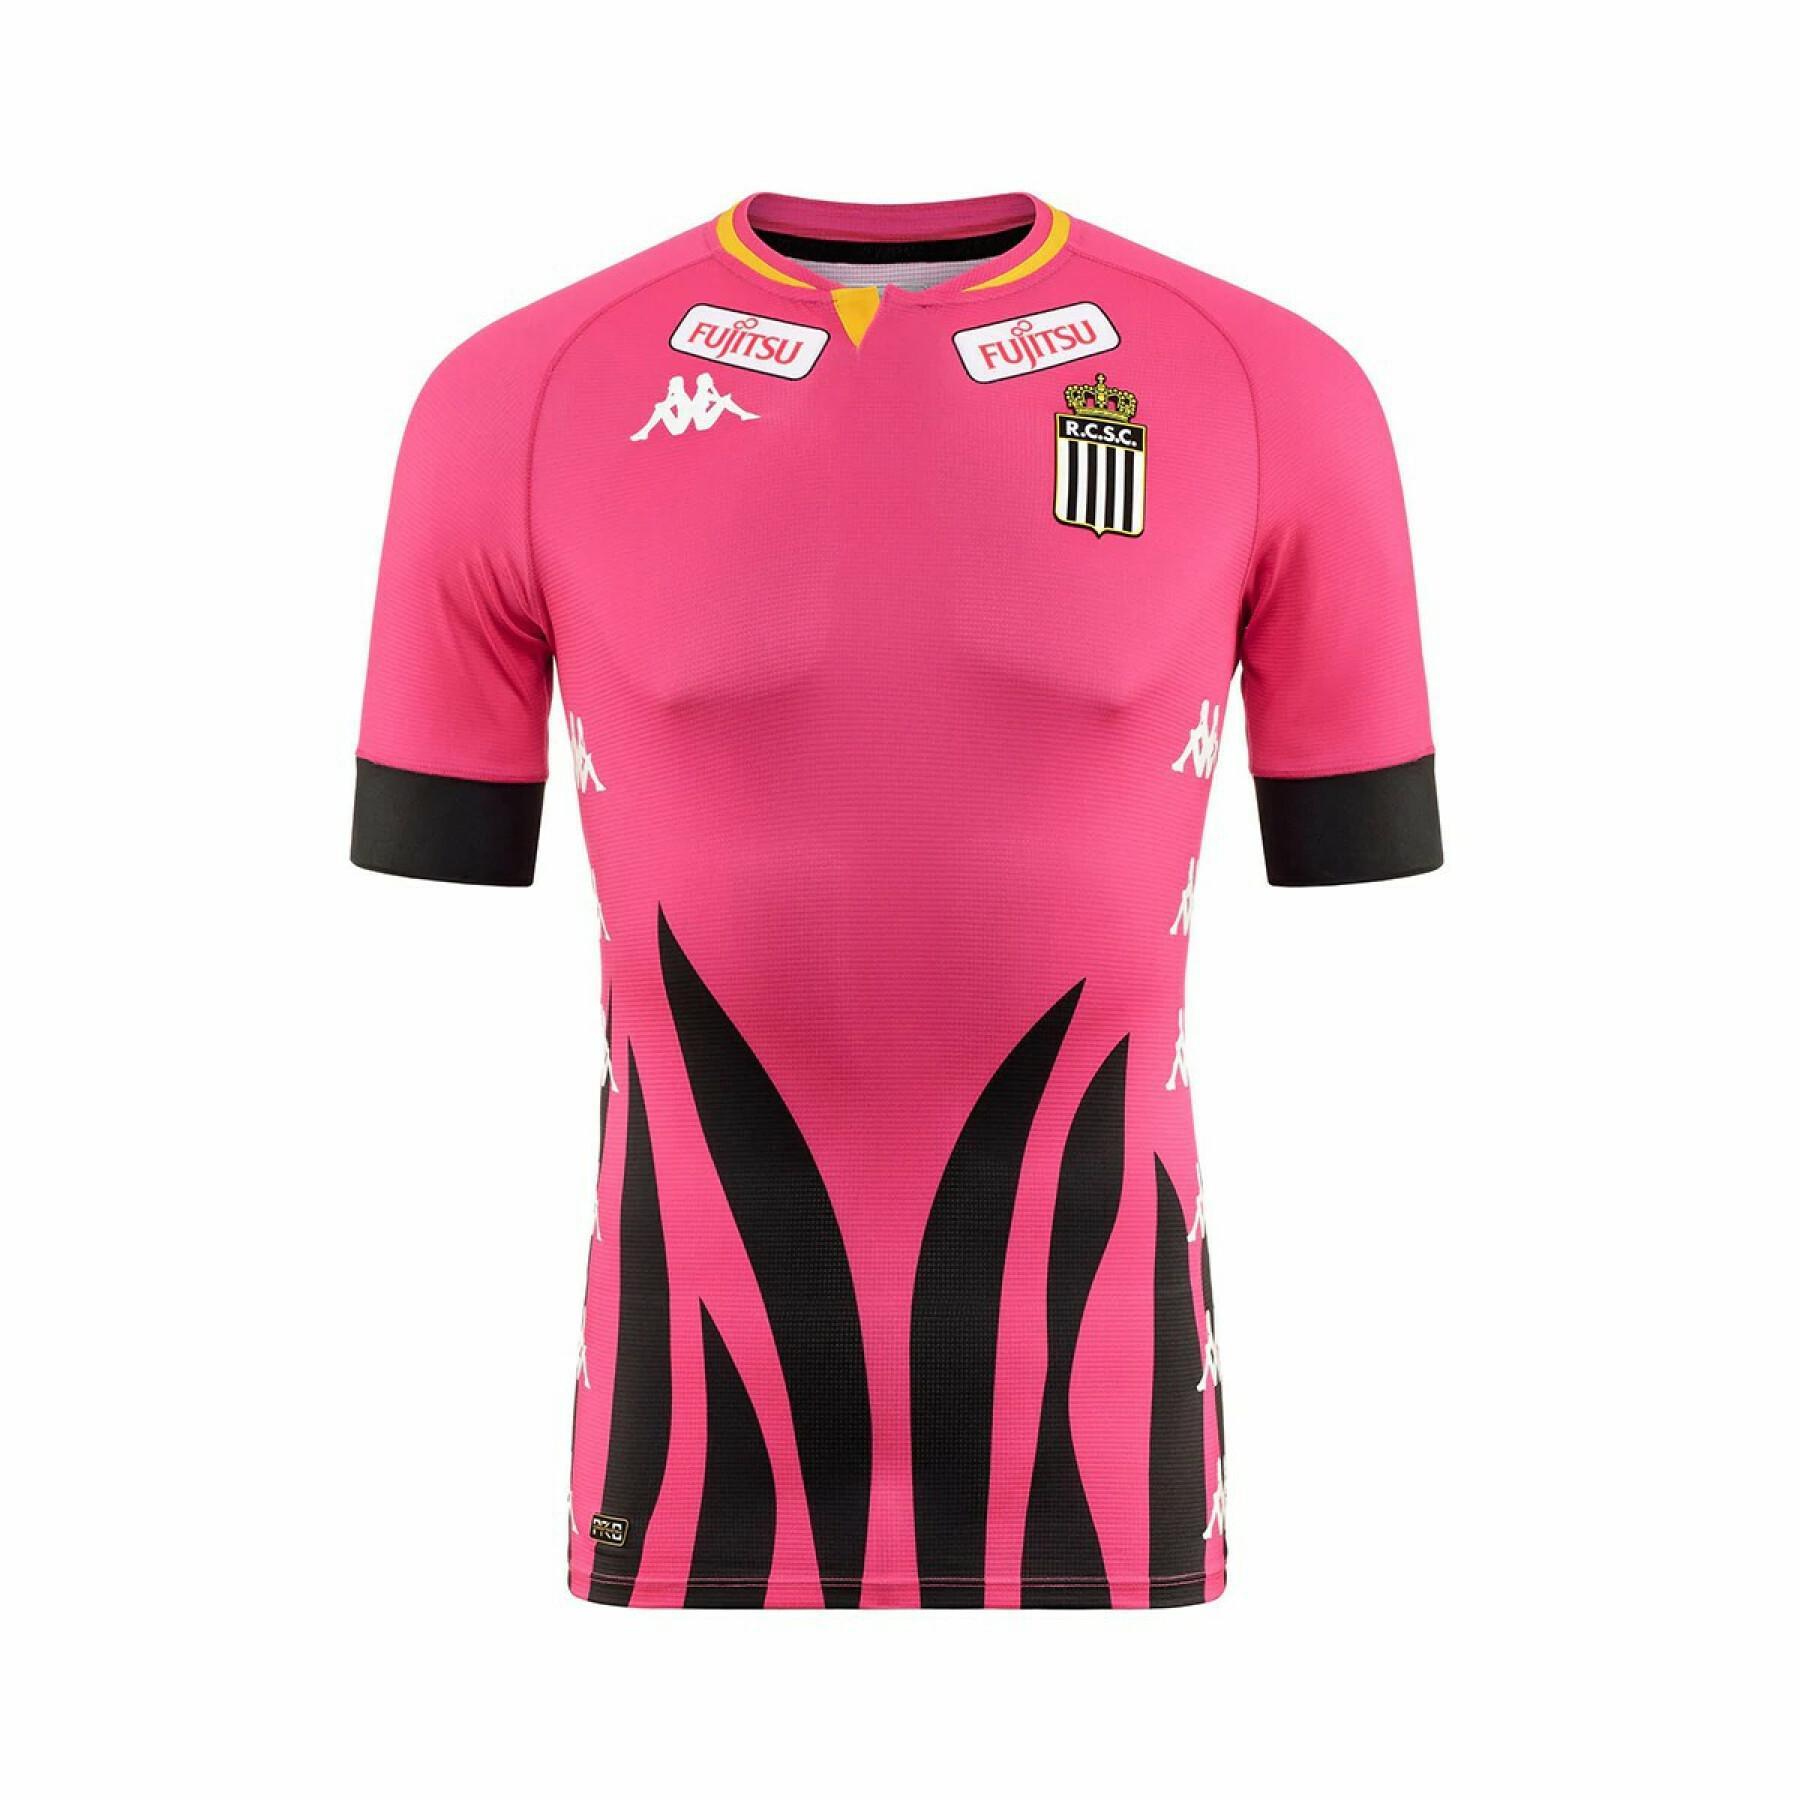 Authentic Away Jersey RCS Charleroi 2020/21